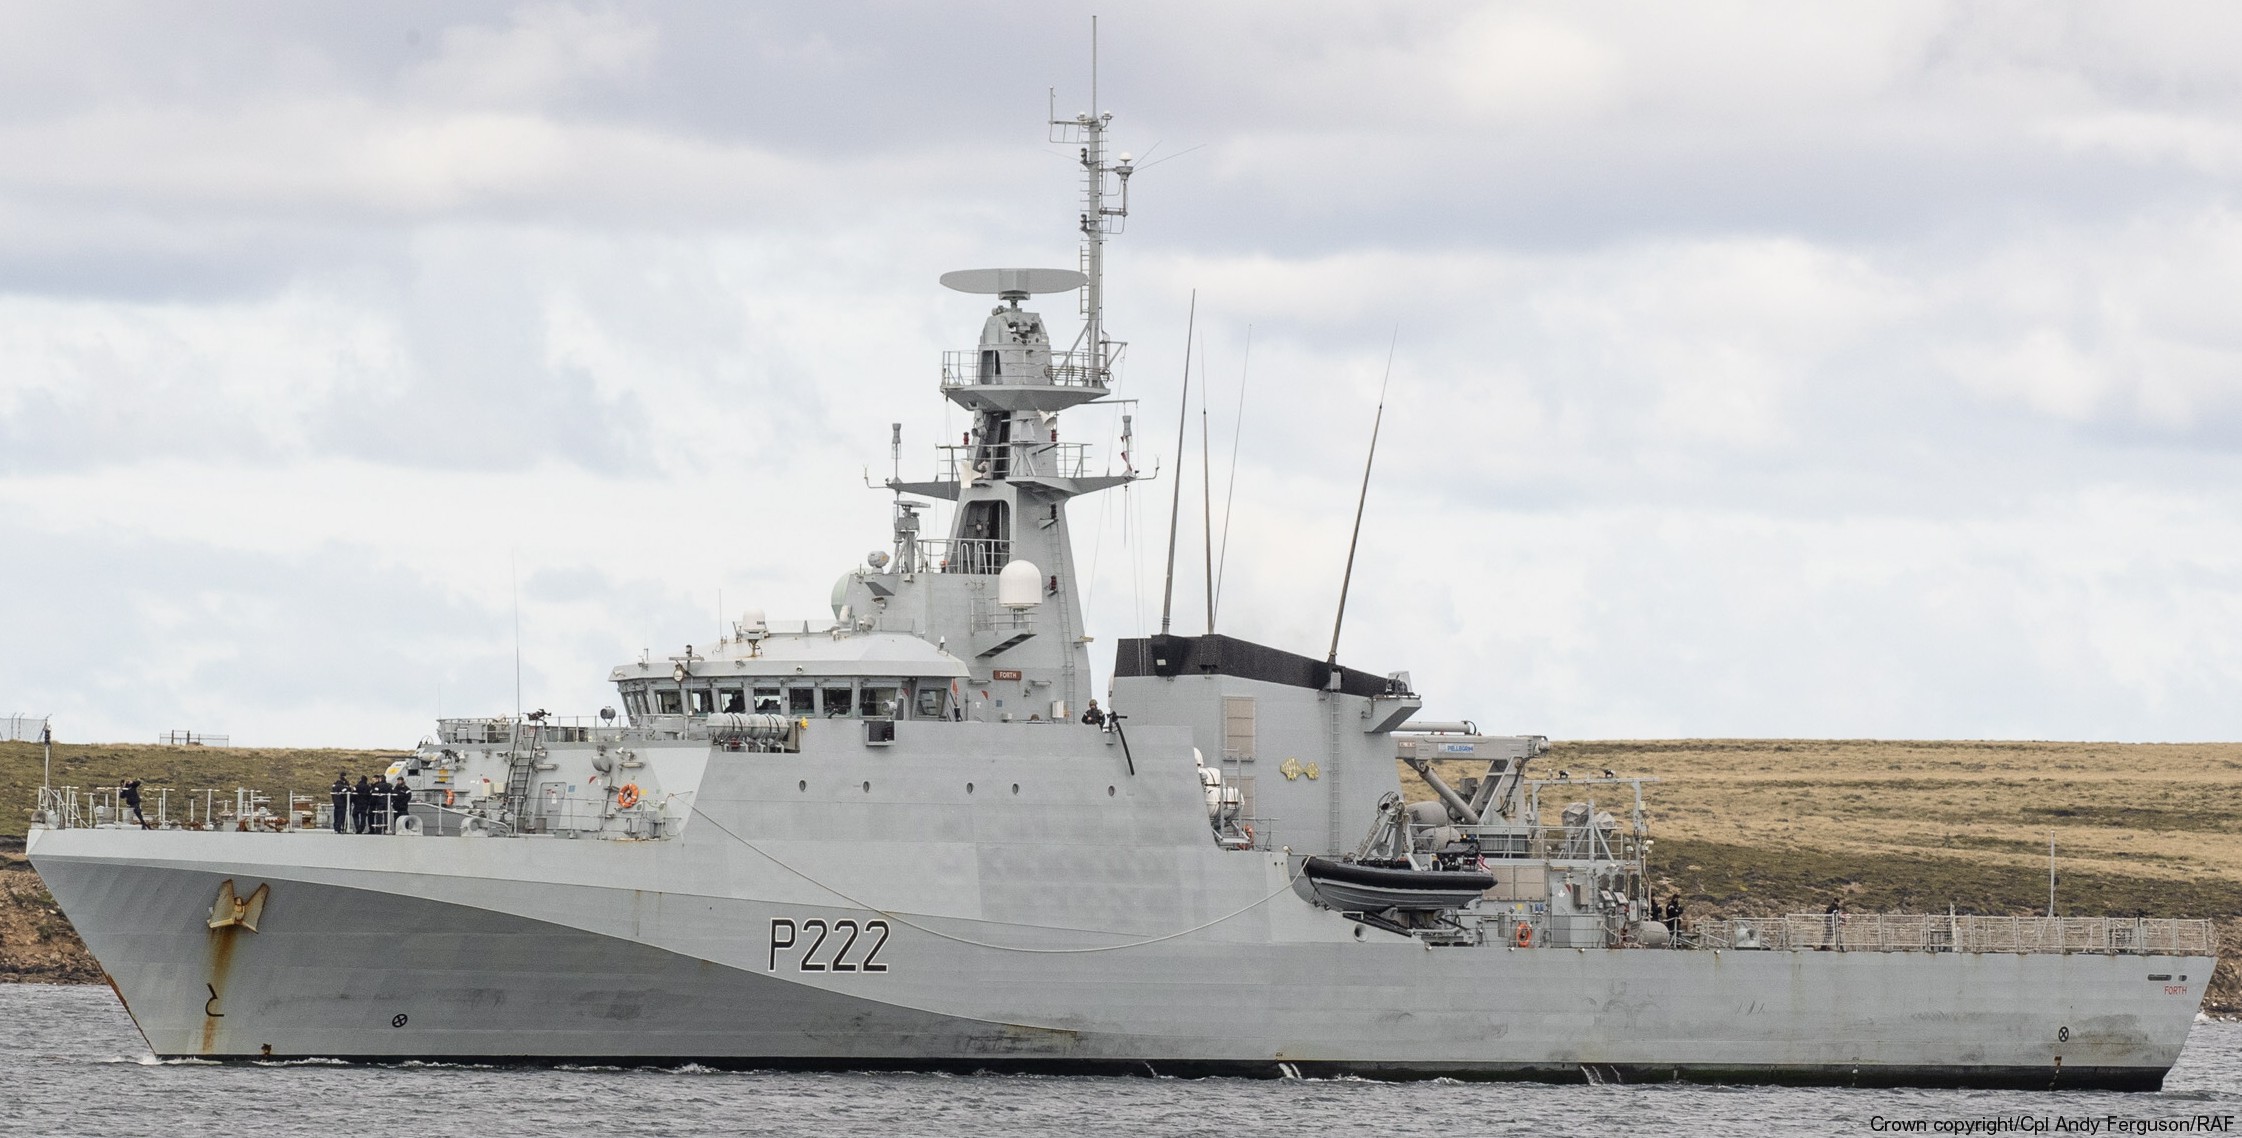 p222 hms forth river class offshore patrol vessel opv royal navy 03